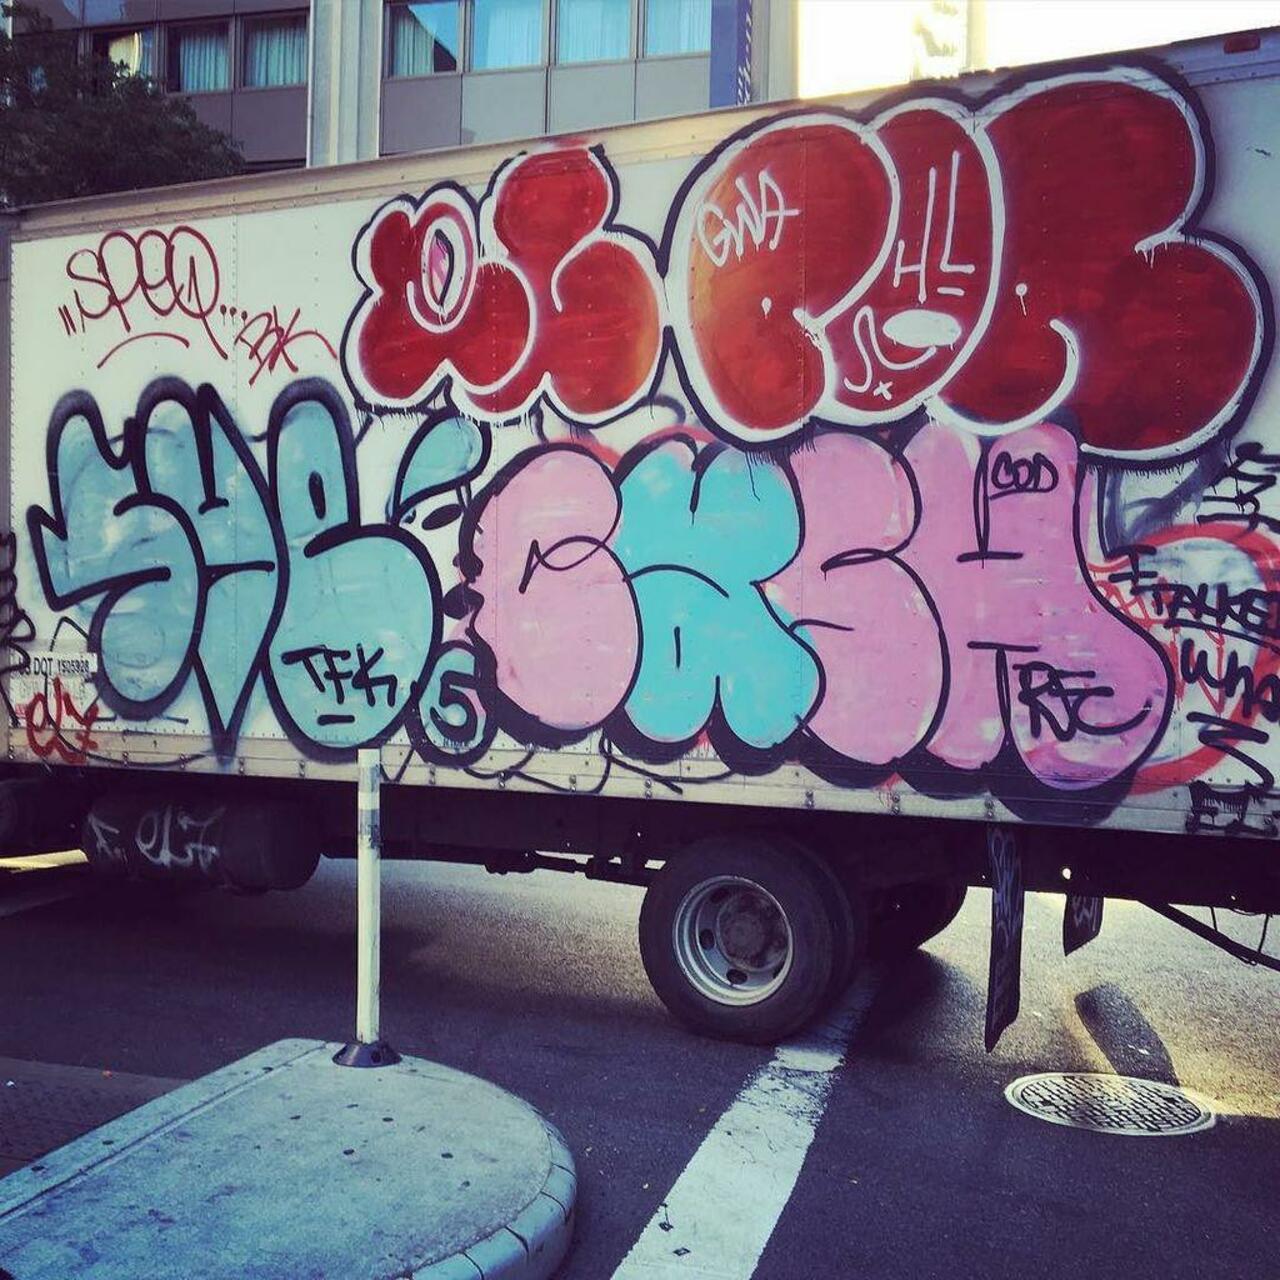 #nycgraffititruck #nyctags #nycgraffiti #nycstreetart #nycgraffart #graffiti #graffitiwalls #tags #streetart #stree… http://t.co/a8G4zDMnSM